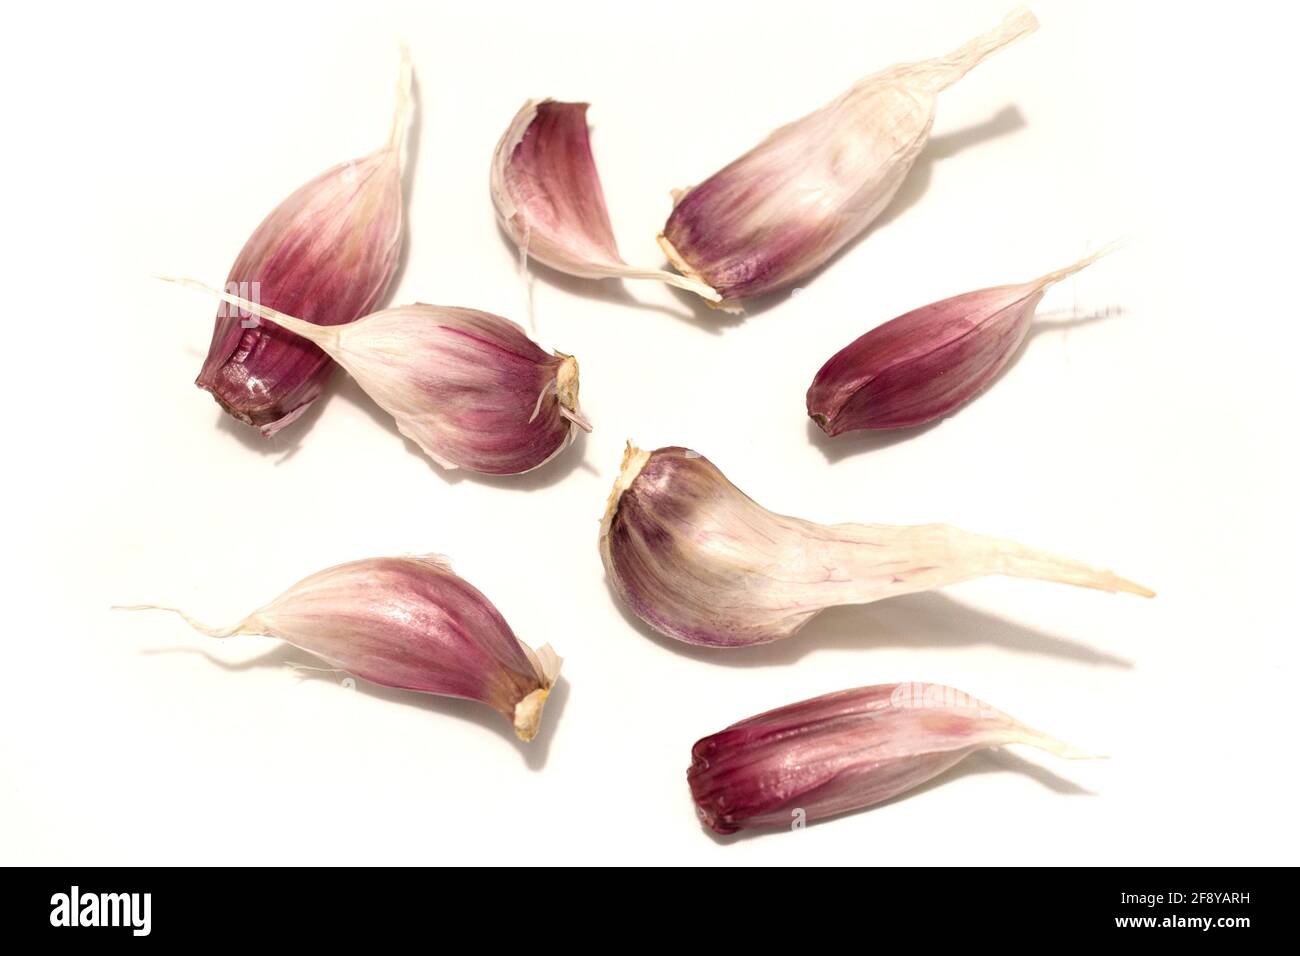 Eight cloves of garlic on a white background. Studio photography. Stock Photo